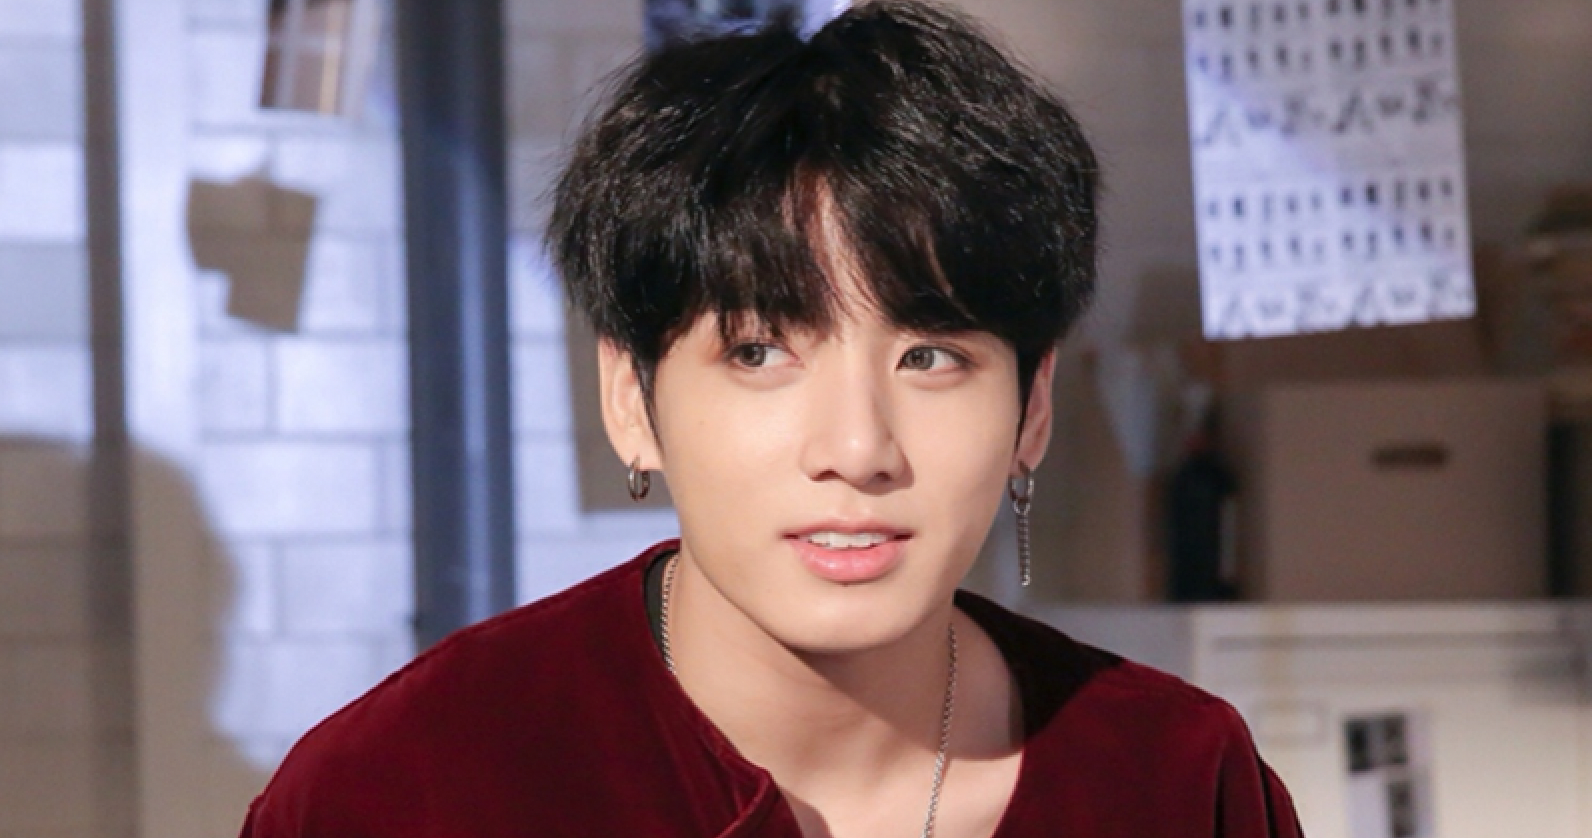 BTS Jungkook is the 1st Korean Soloist to Set This Record on Billboard With His Solo Songs